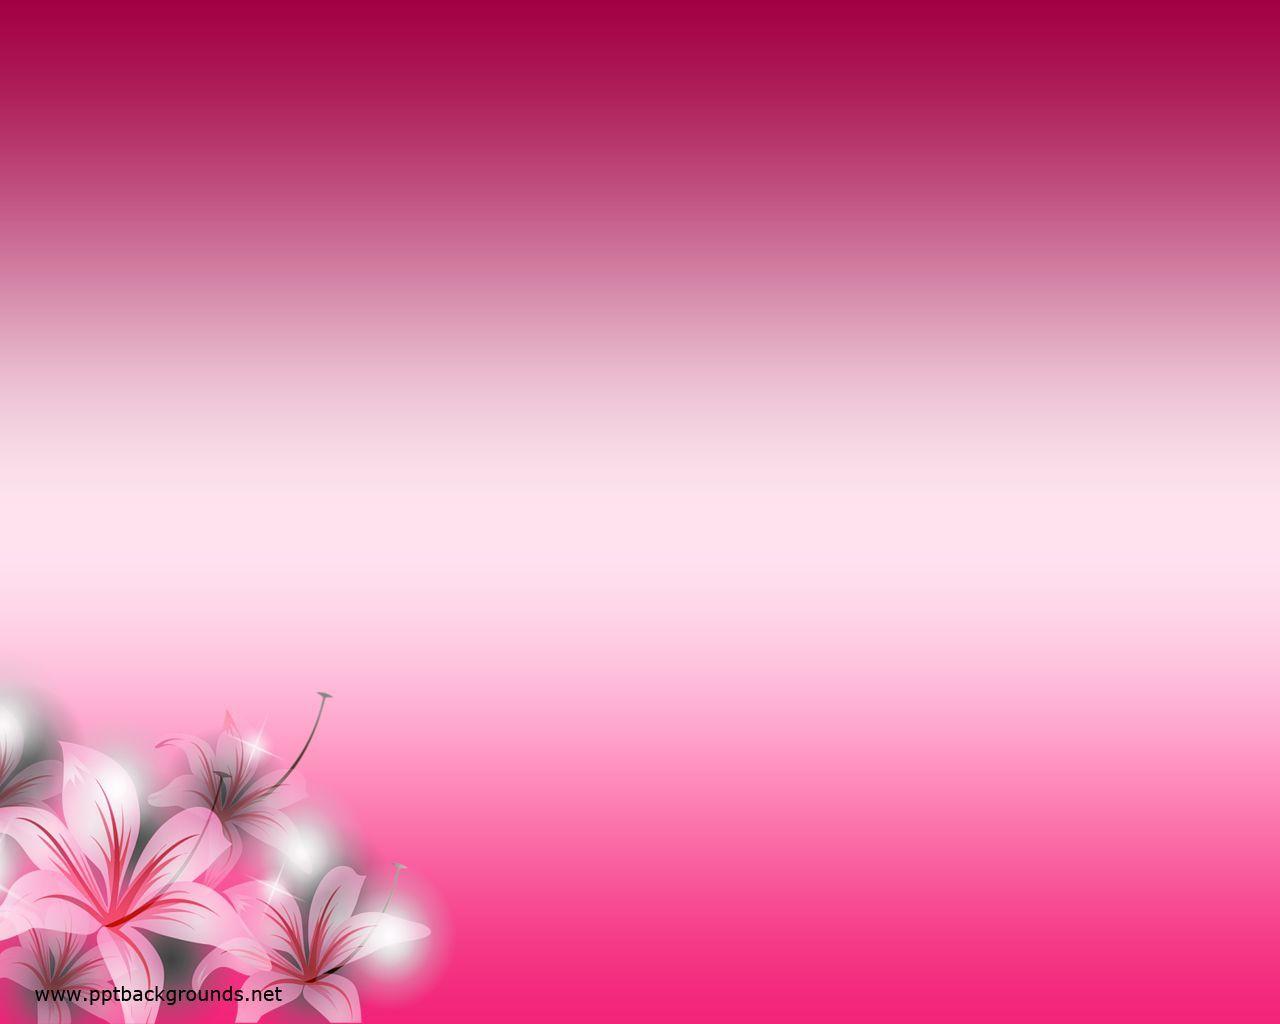 Free Pink Flowers Background For PowerPoint PPT